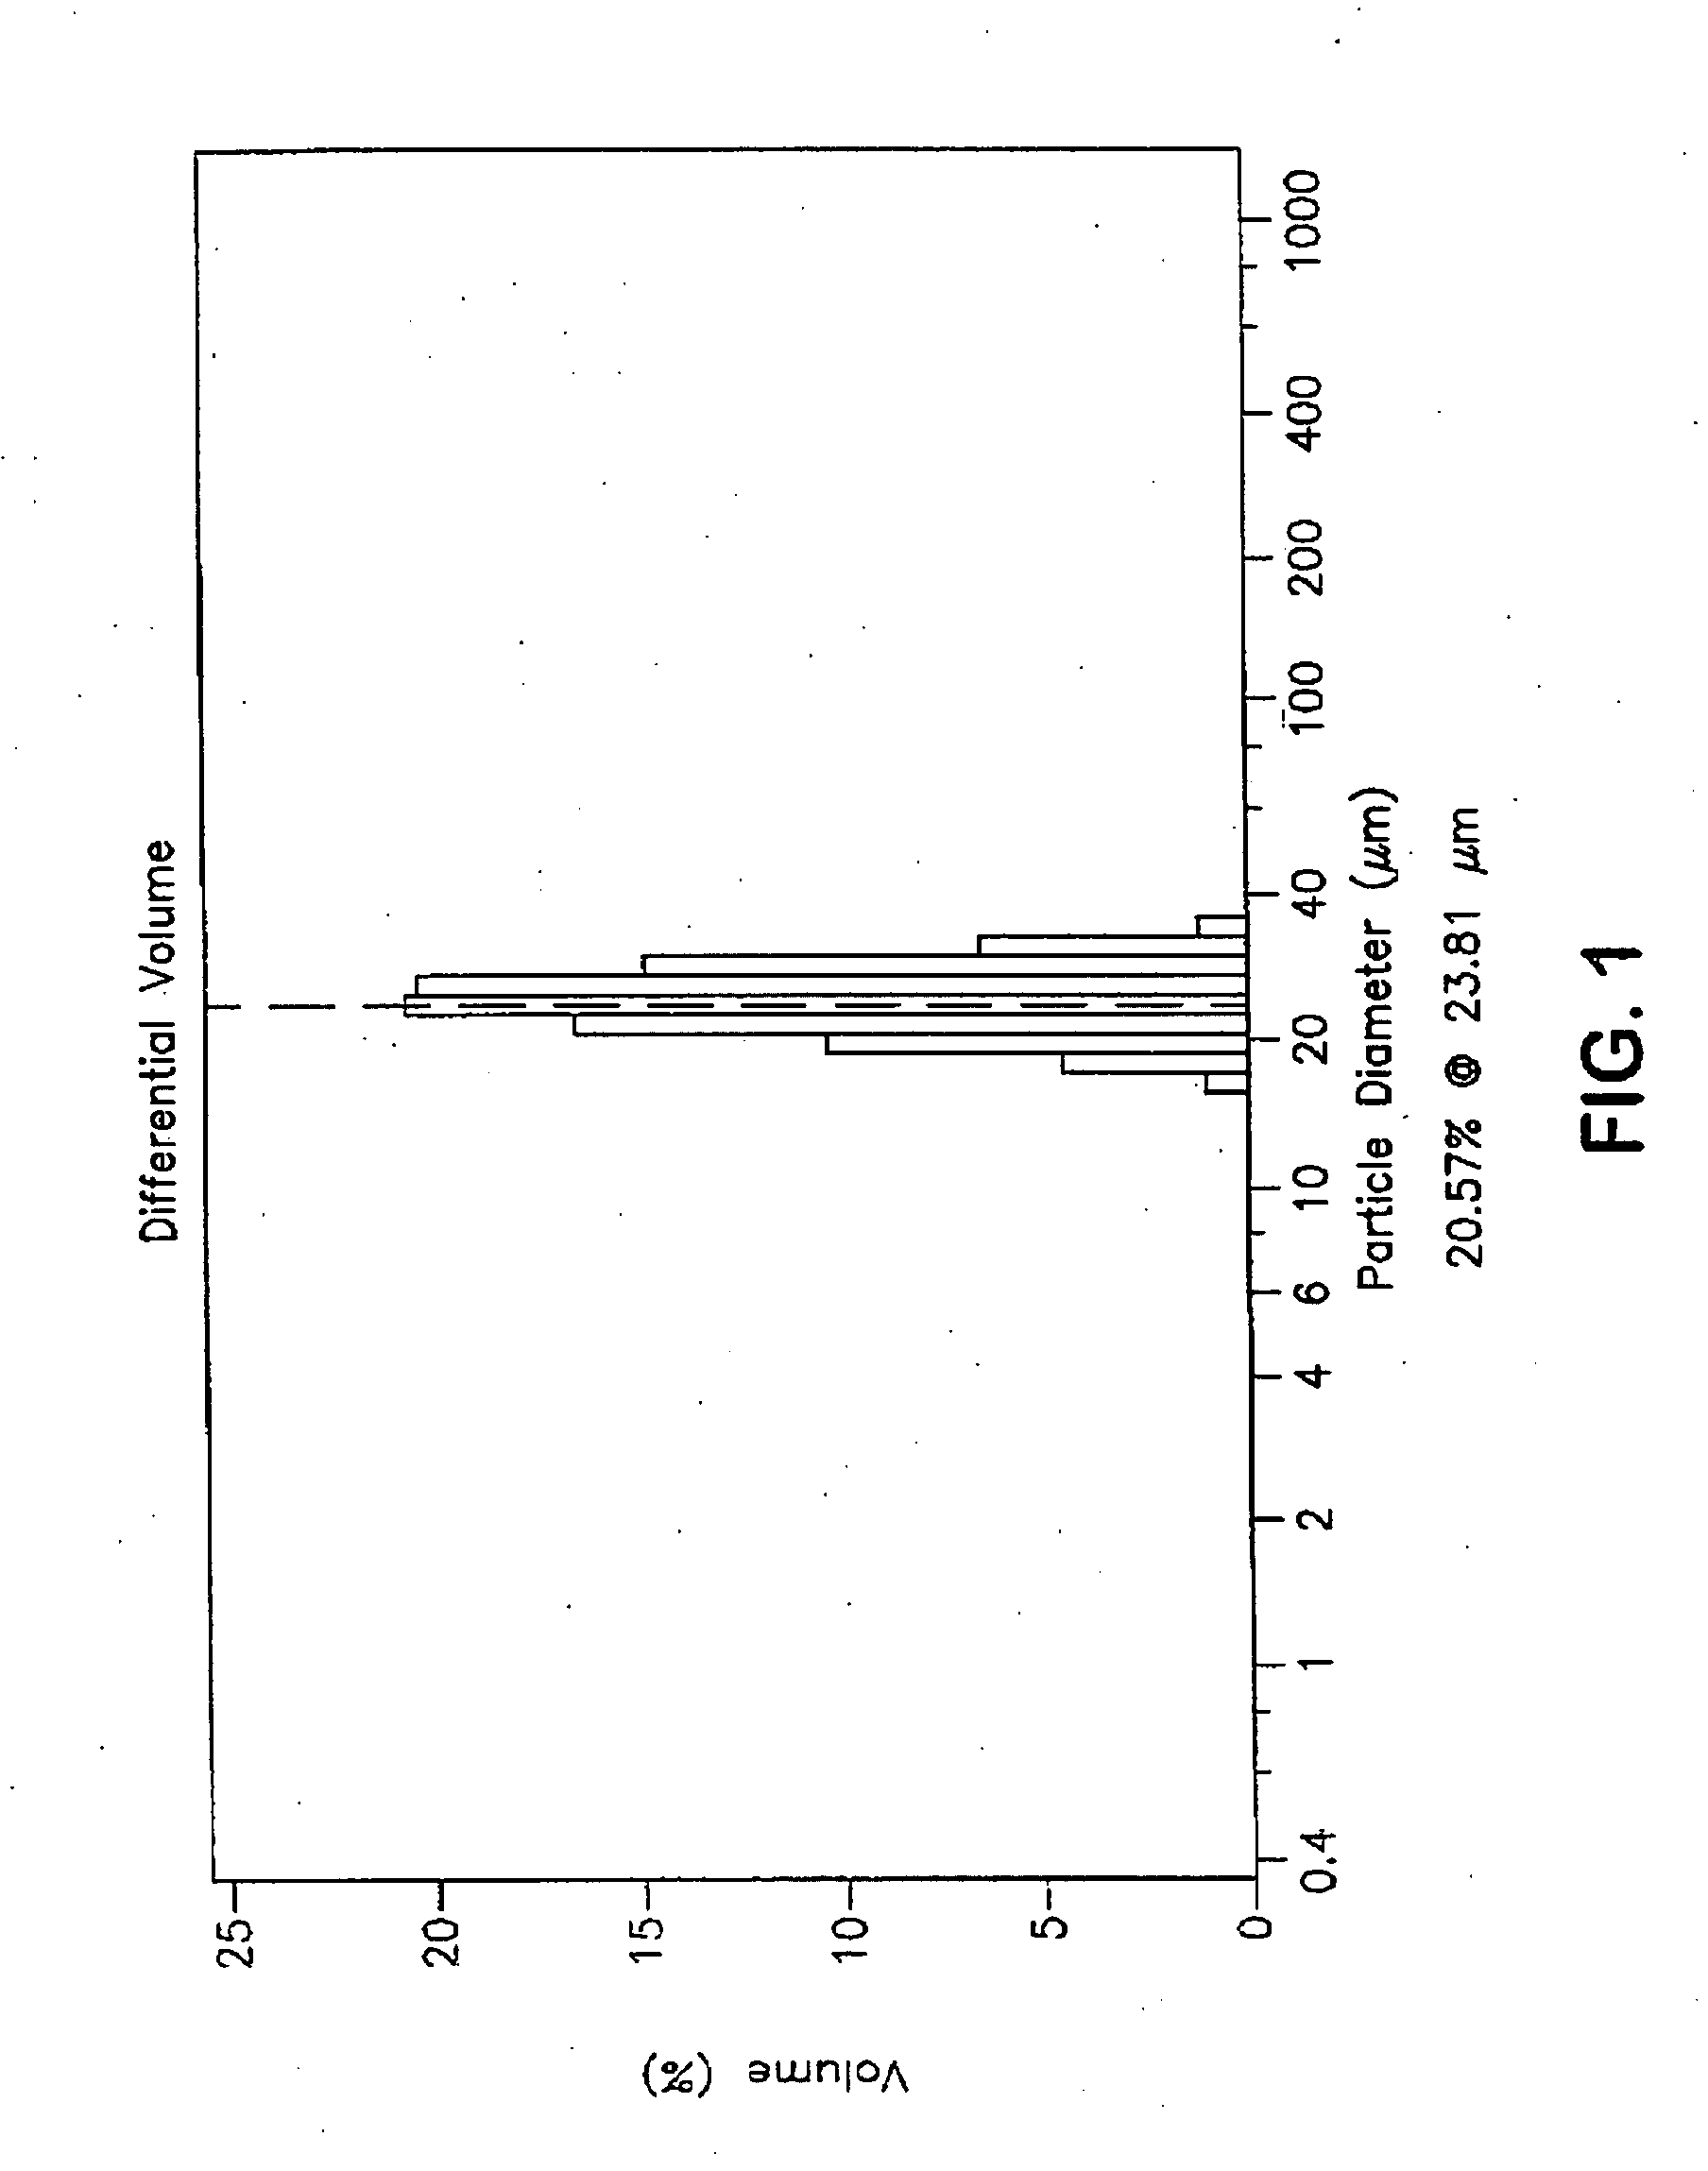 Method of preparing spheroid polymer particles having a narrow size distribution by dispersion polymerization, particles obtainable by the method and use of these particles